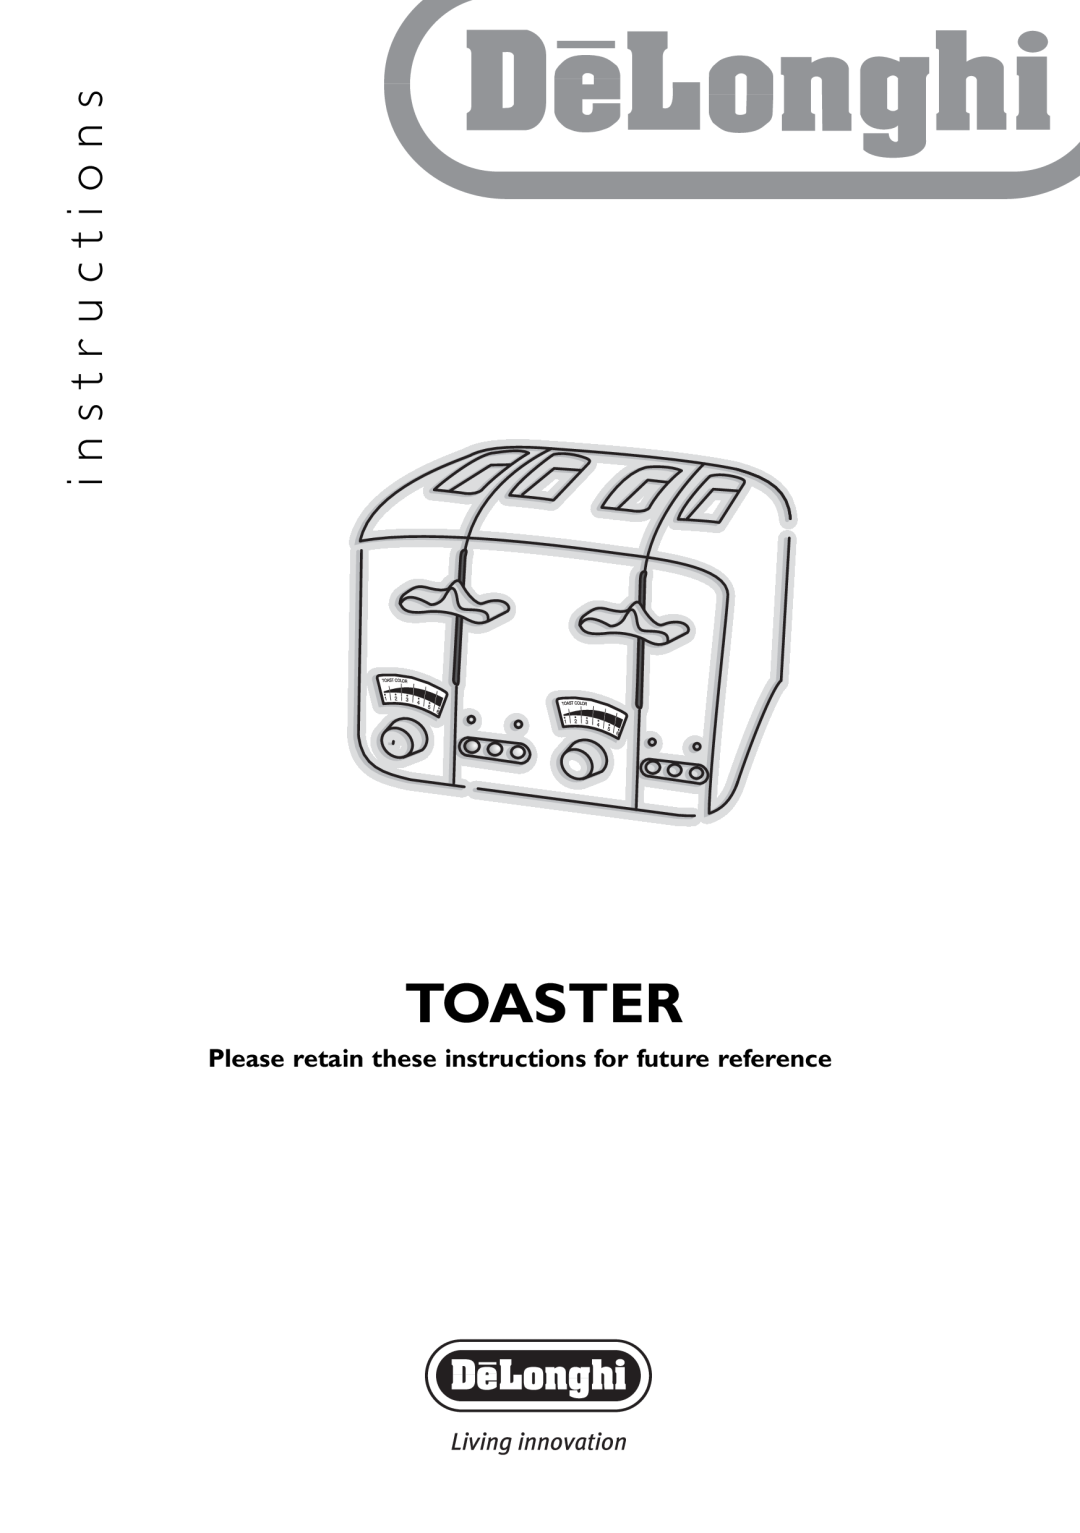 DeLonghi CT04R manual Please retain these instructions for future reference, Toaster, i n s t r u c t i o n s 